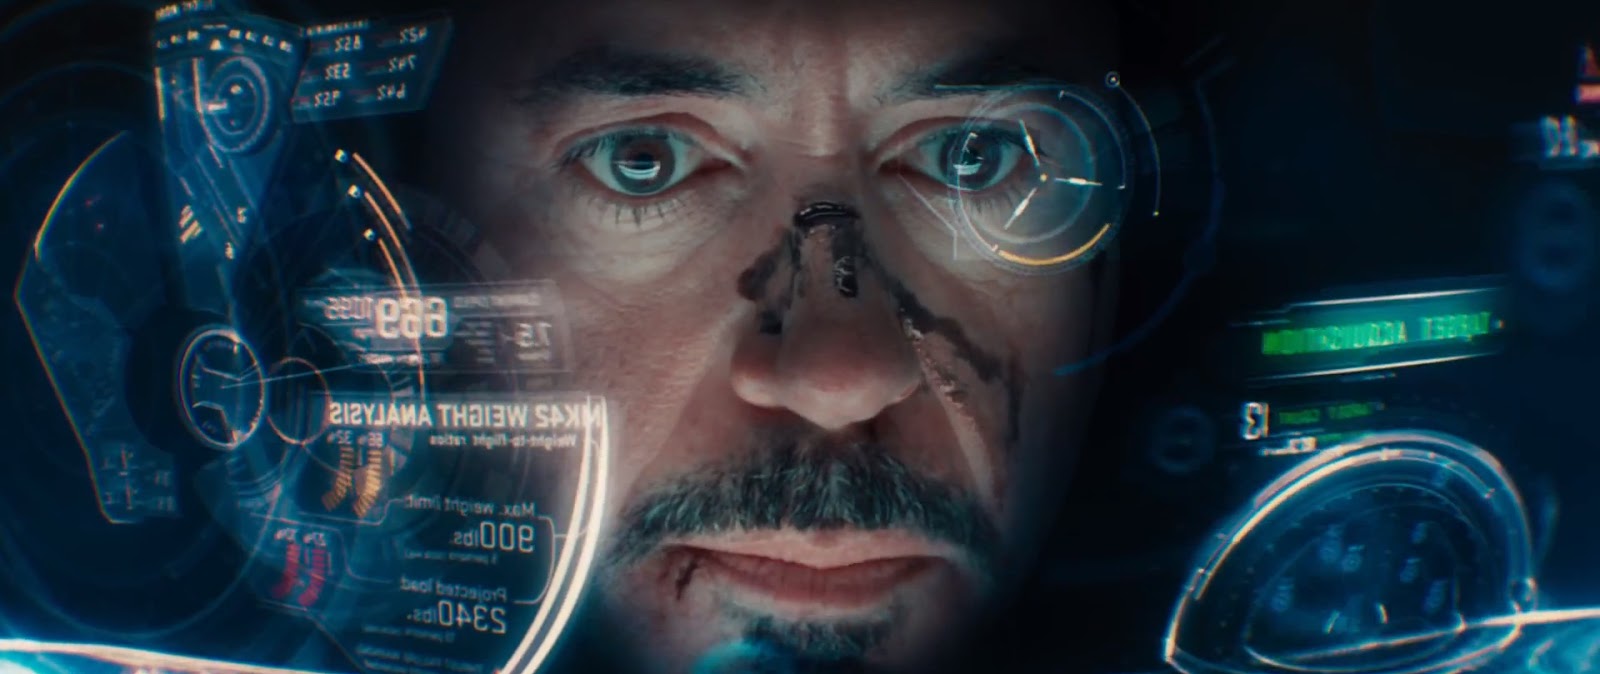 How The Original IPhone Inspired Marvel's Iron Man Heads Up Display Design